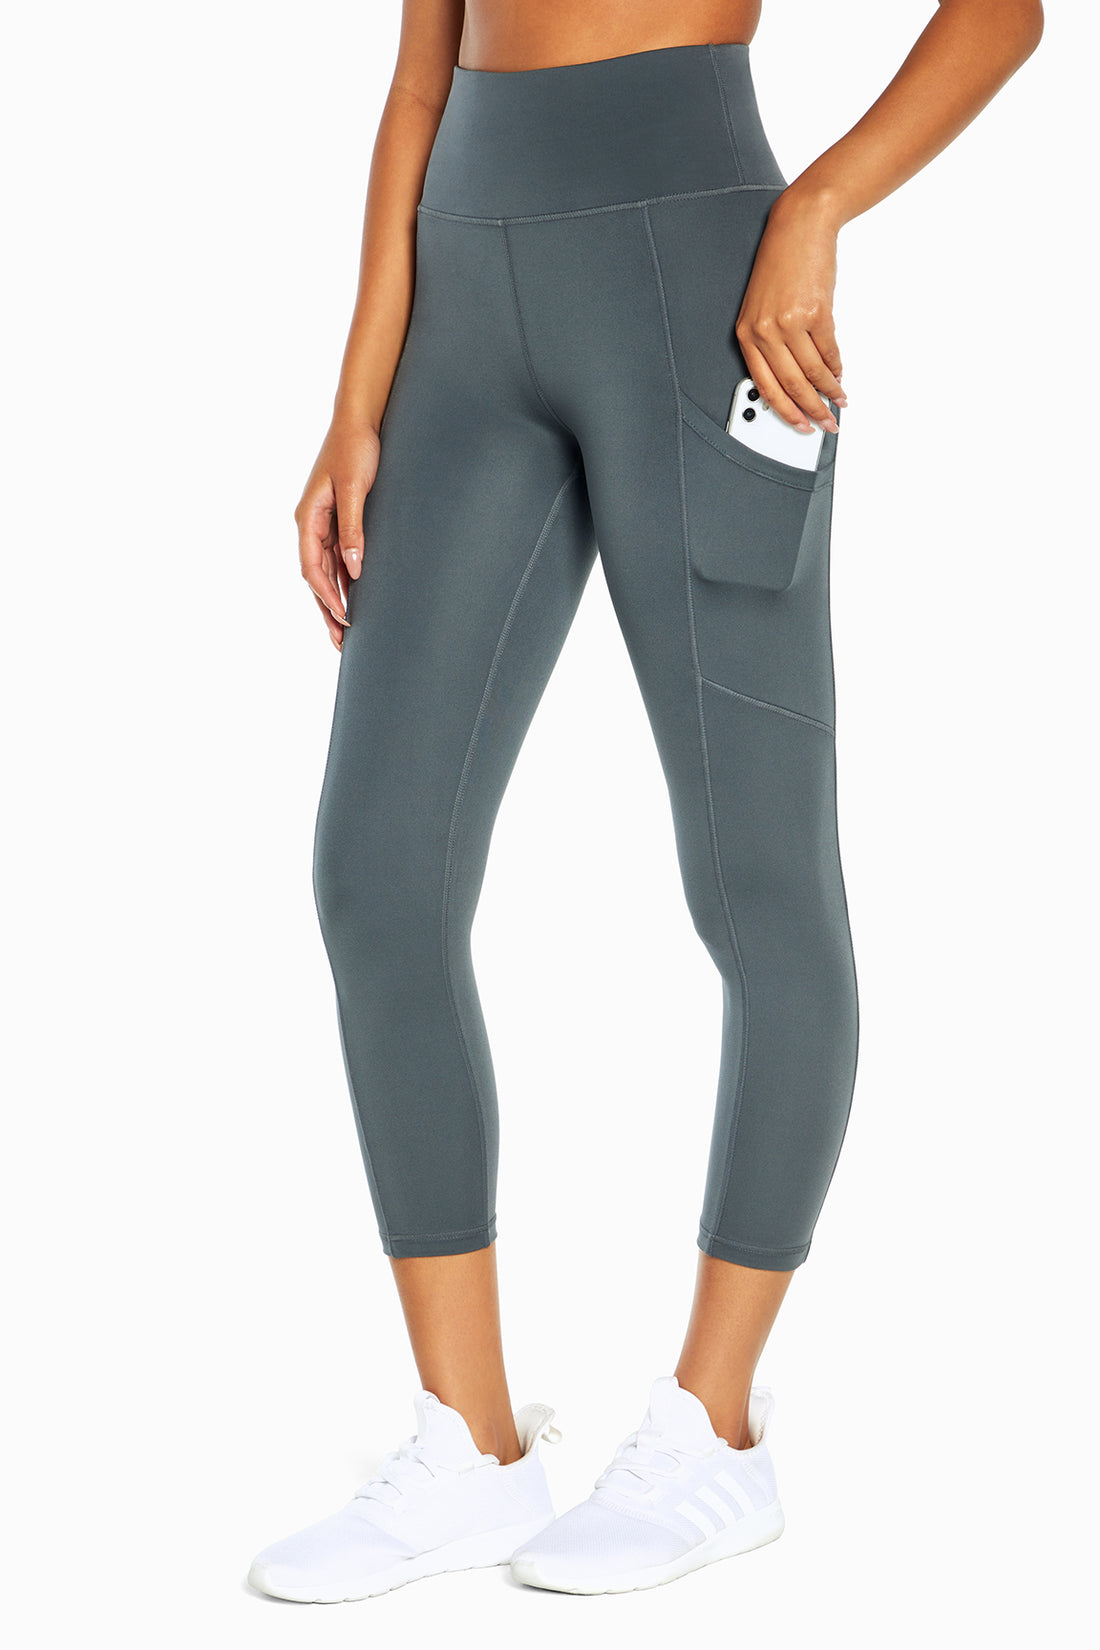 WEEKEND by marika Women's Activewear On Sale Up To 90% Off Retail